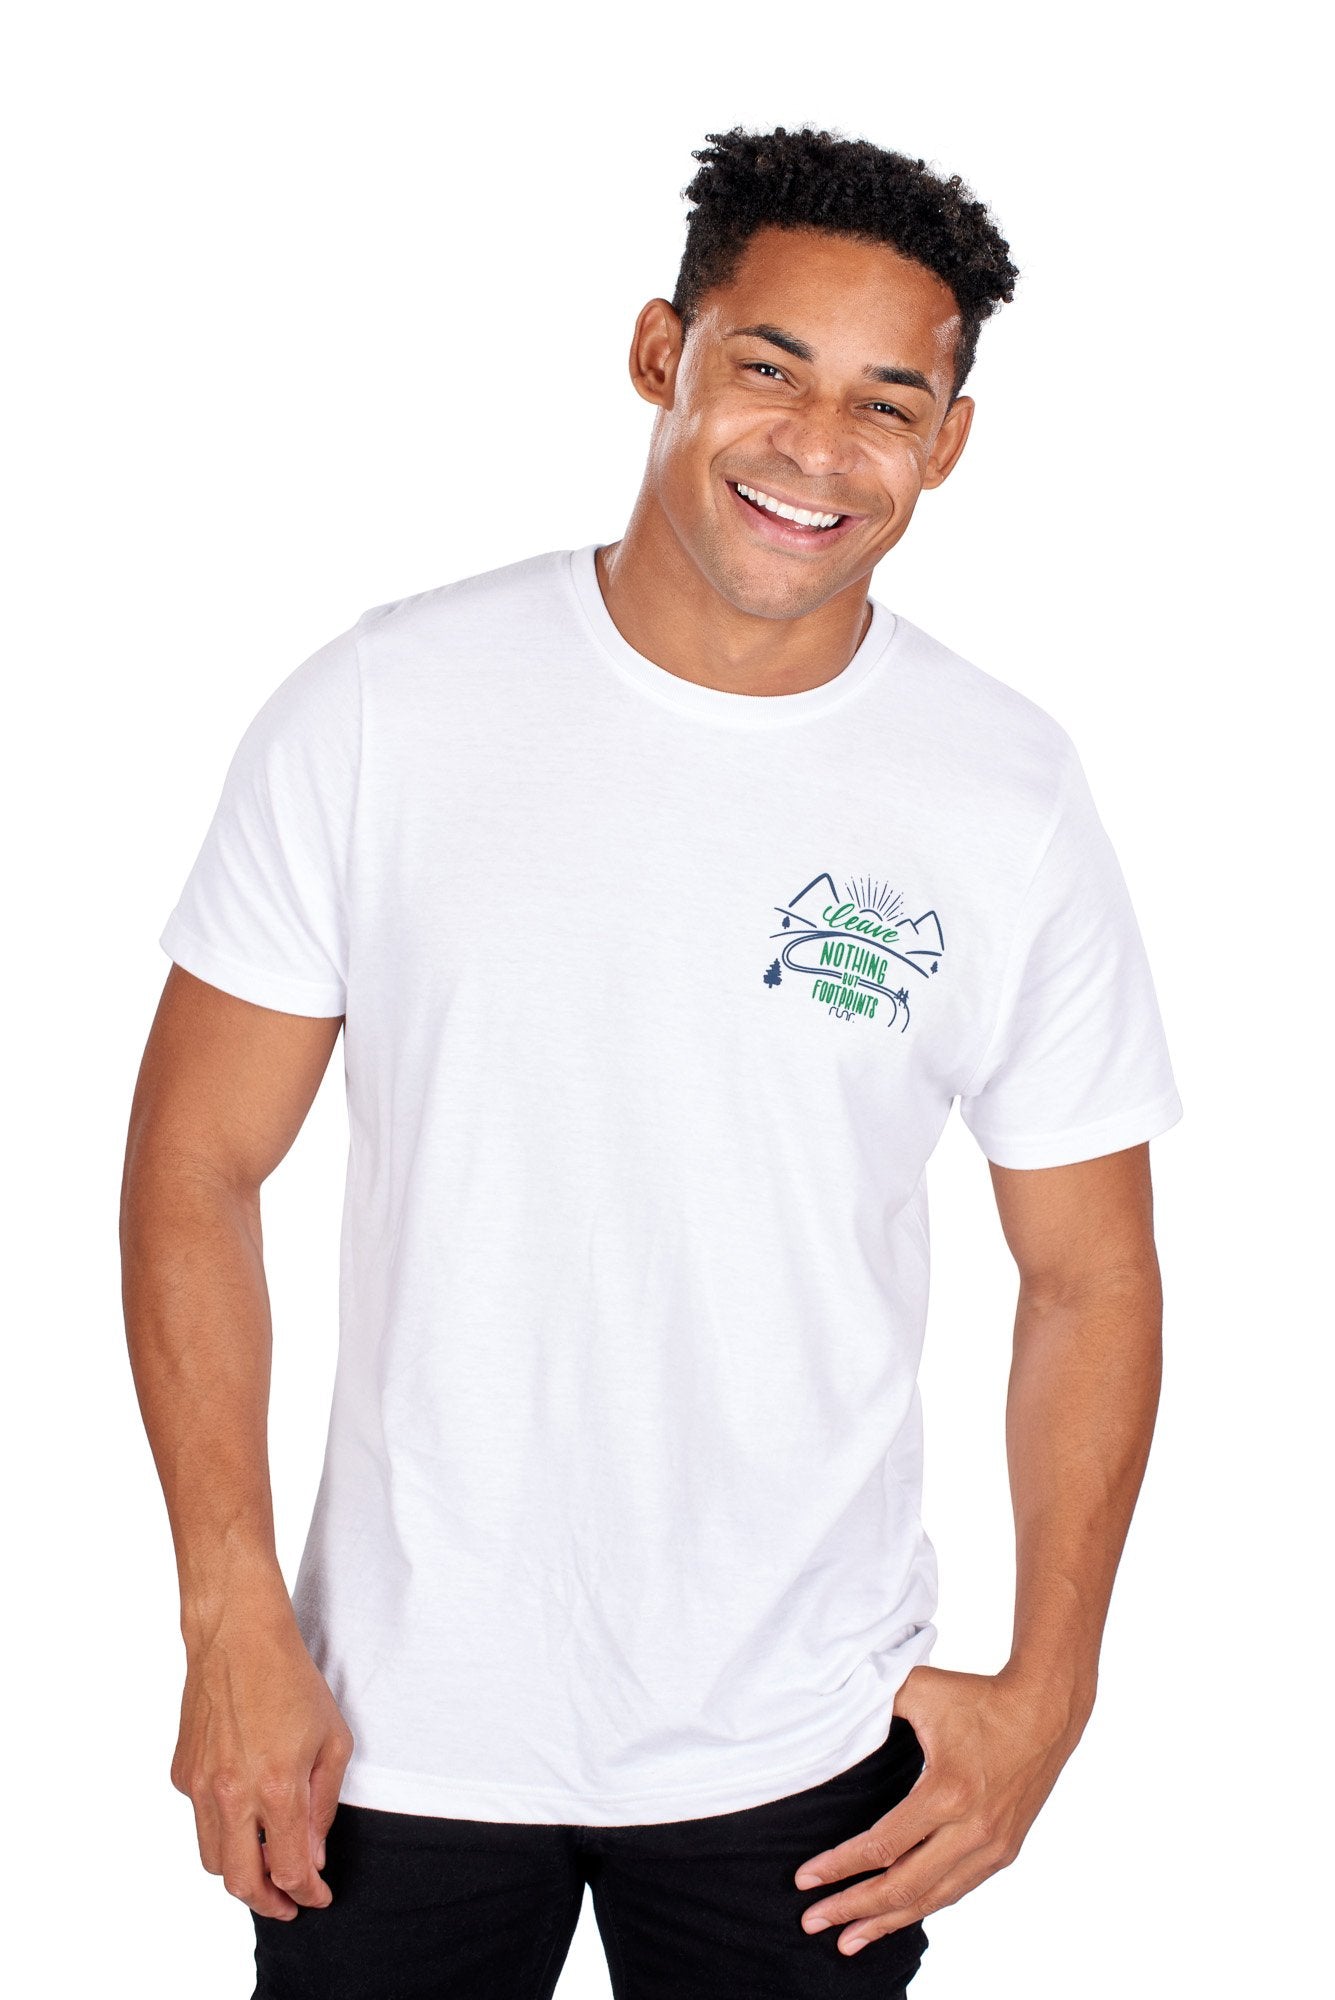 Men's 'Leave Nothing But Footprints' Runr T-Shirts in white